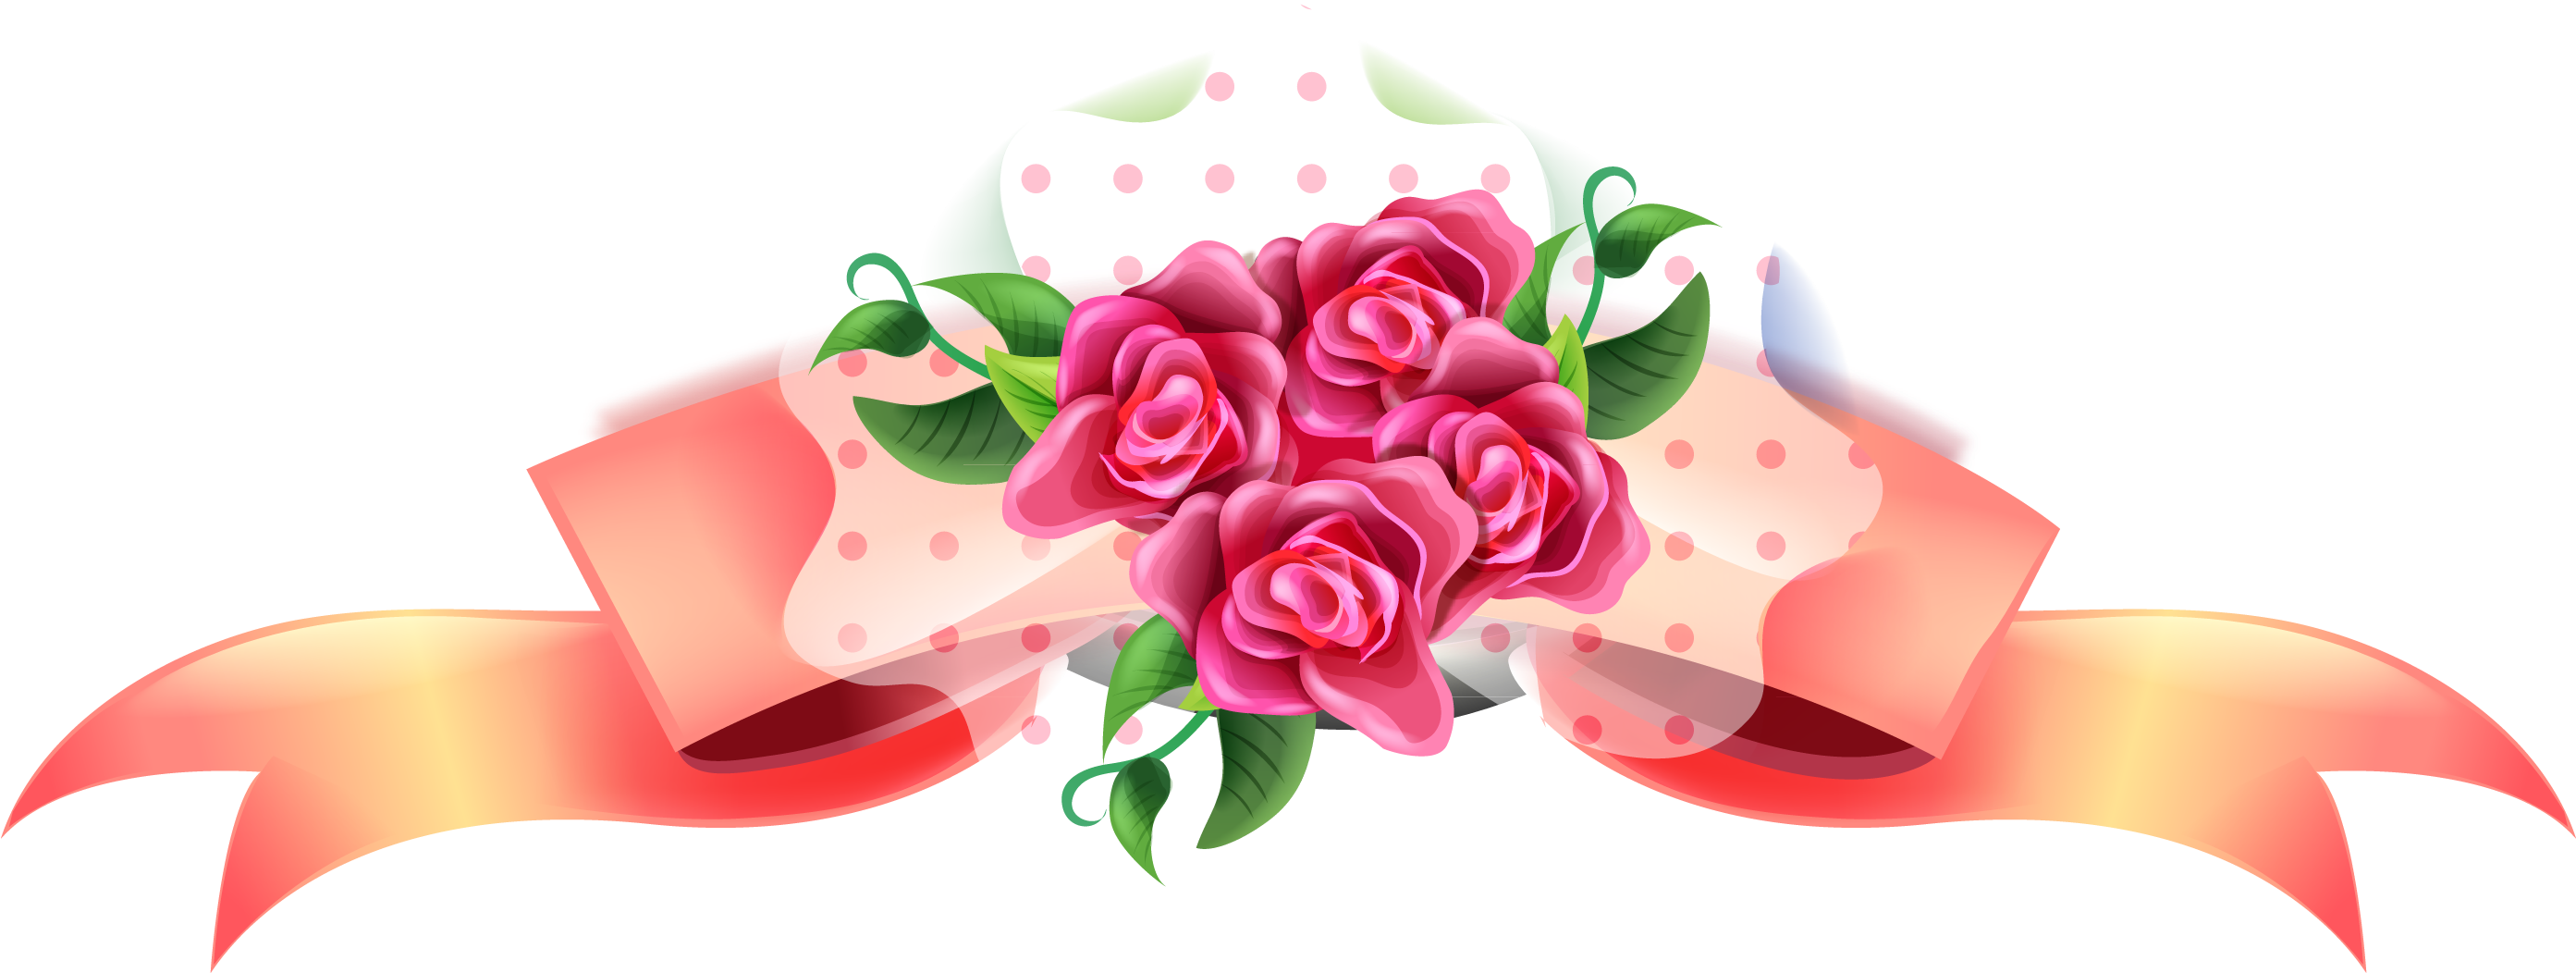 Cartoon Hand Painted Rose Bow - Pink Ribbon Banner Clipart Png (2850x1400)